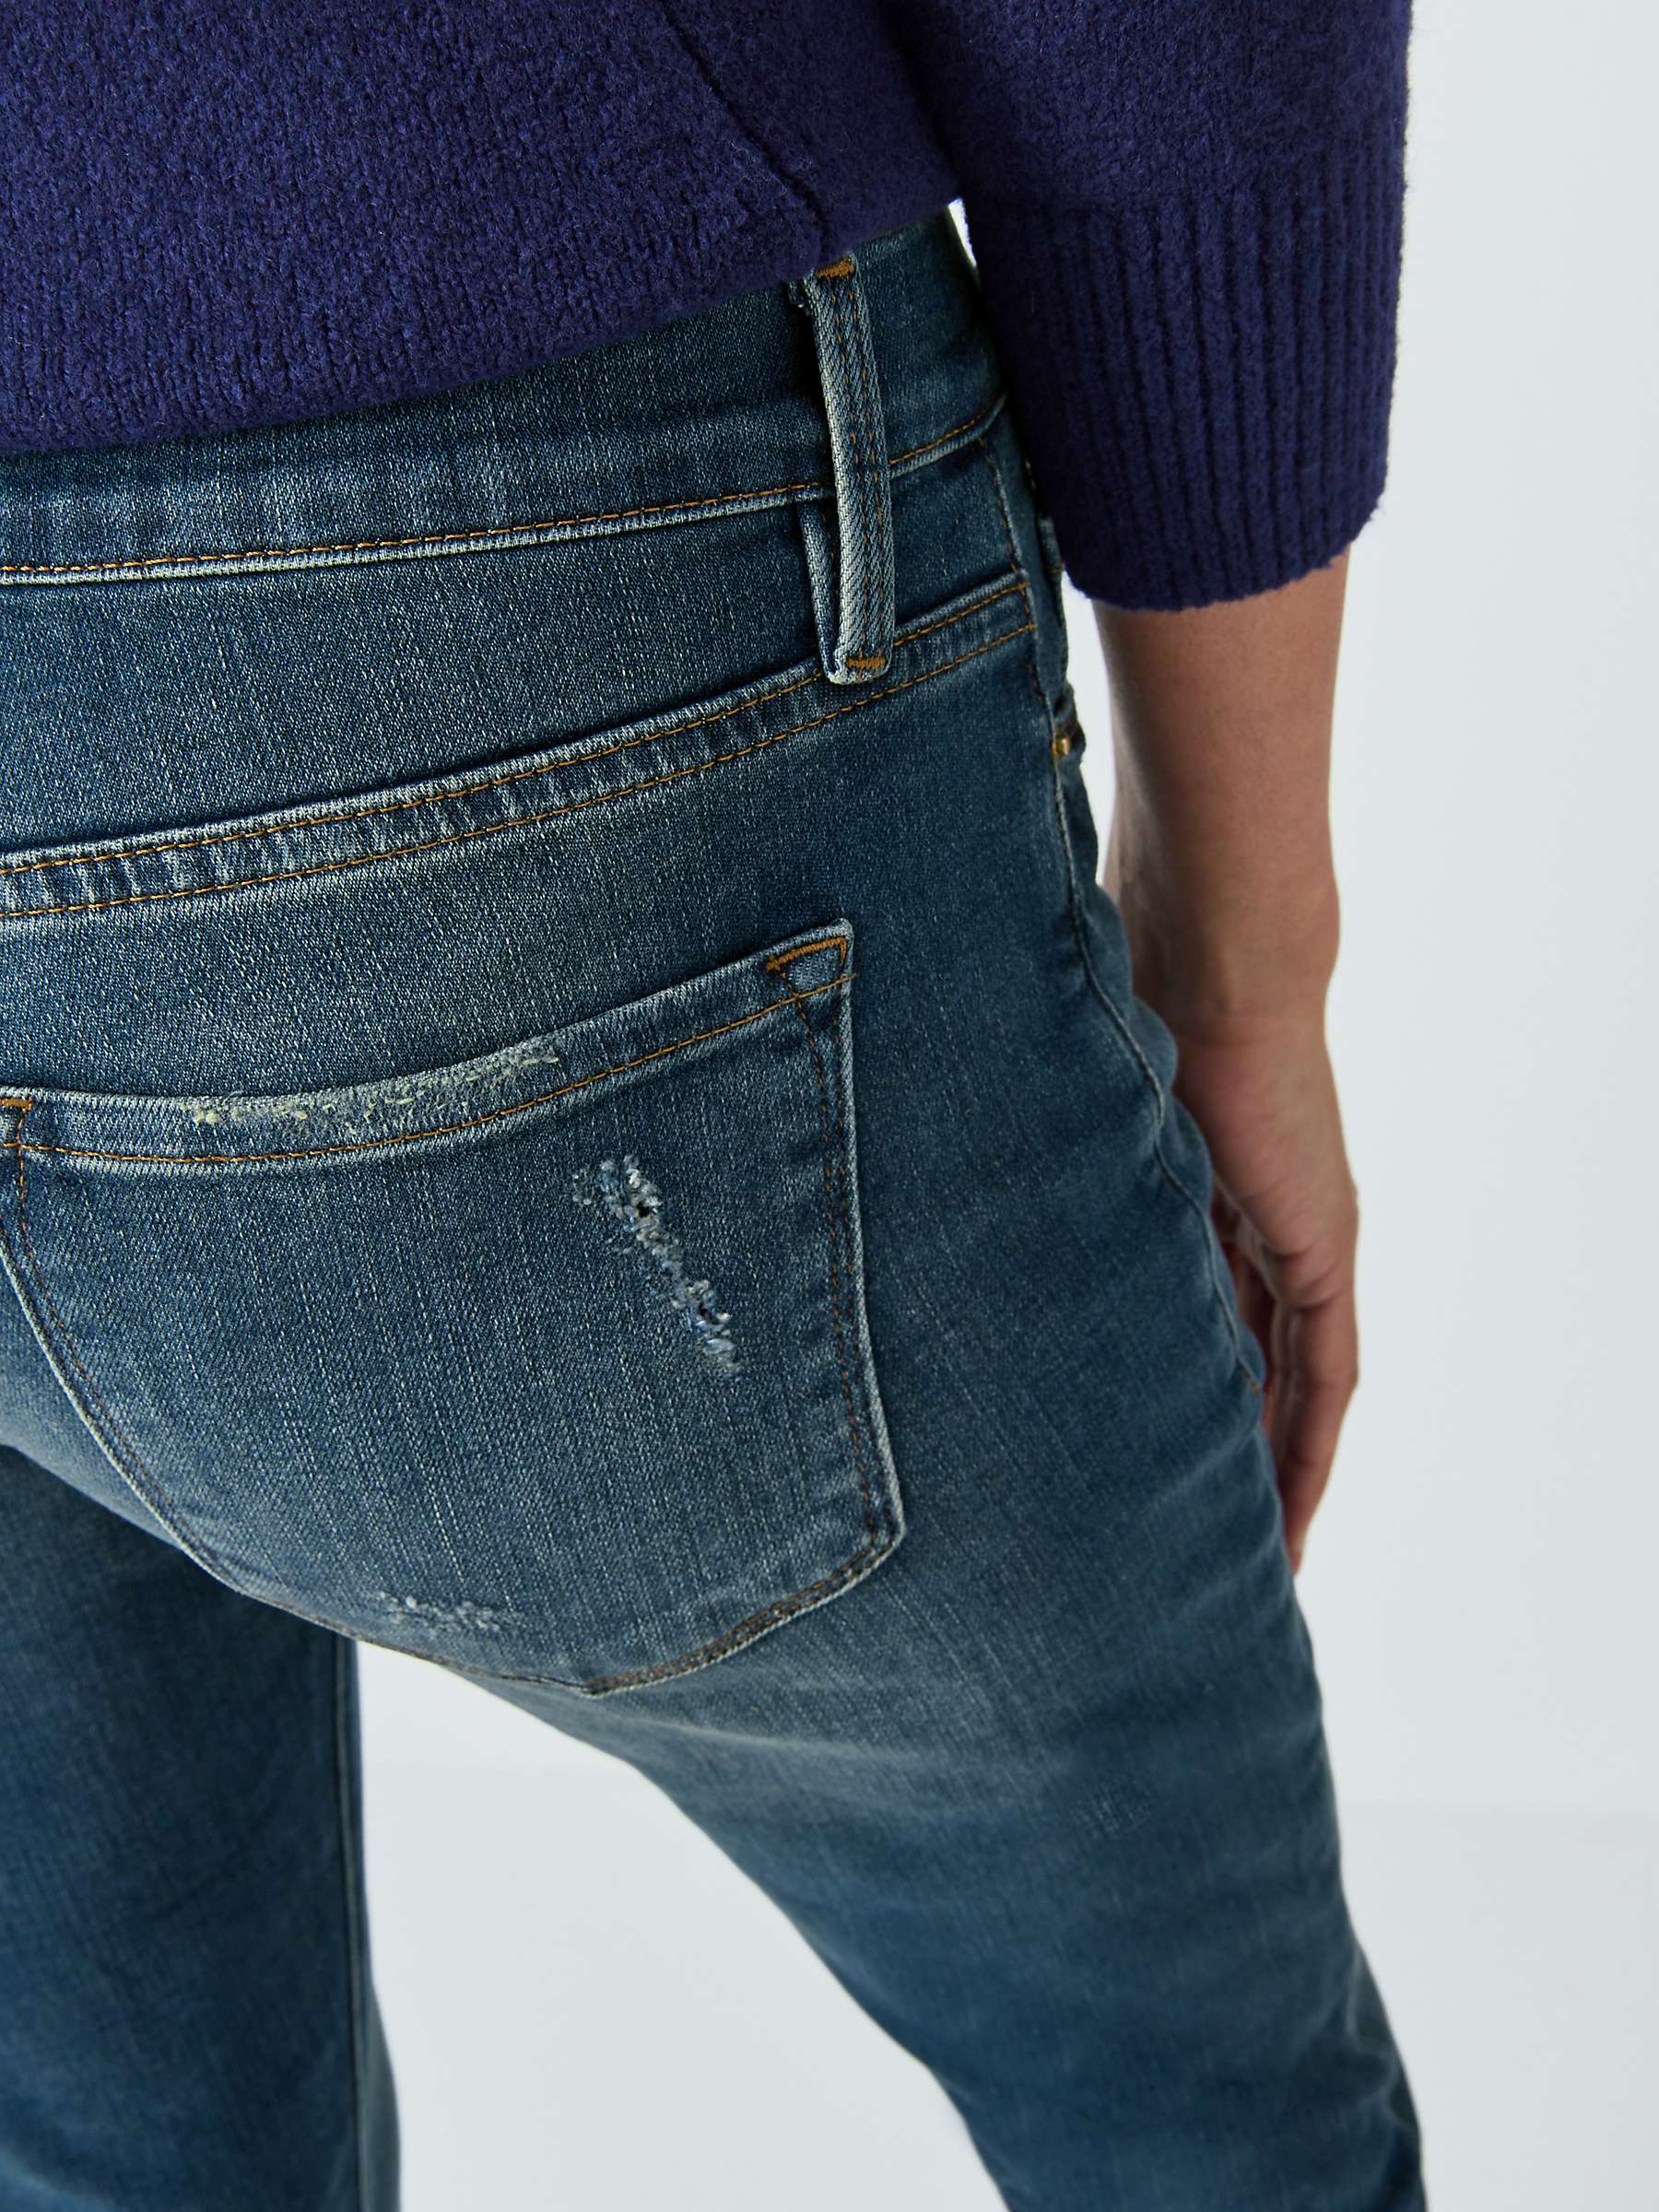 Buy FRAME Le Garcon Mid Rise Slouchy Jeans, Azure Online at johnlewis.com